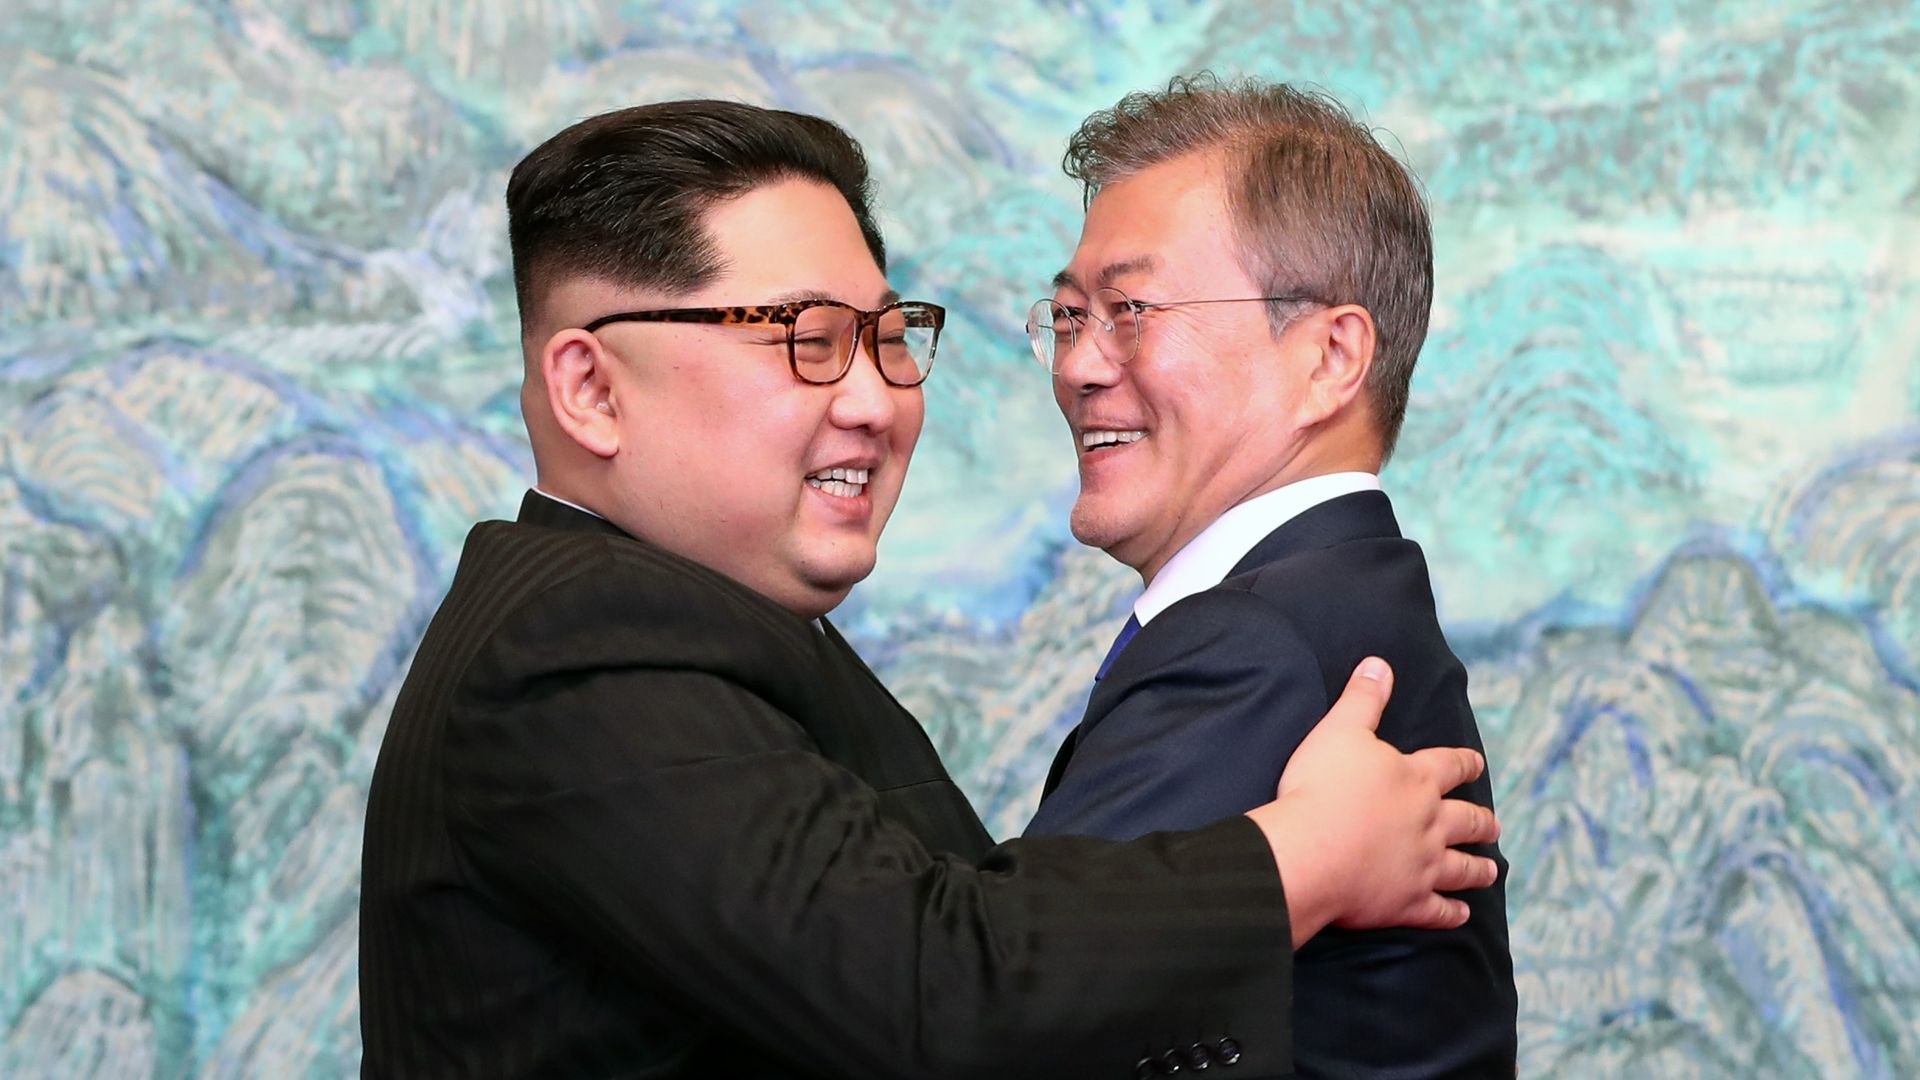 Kim Jong-un ad Moon Jae-in embrace before a blue-green background.